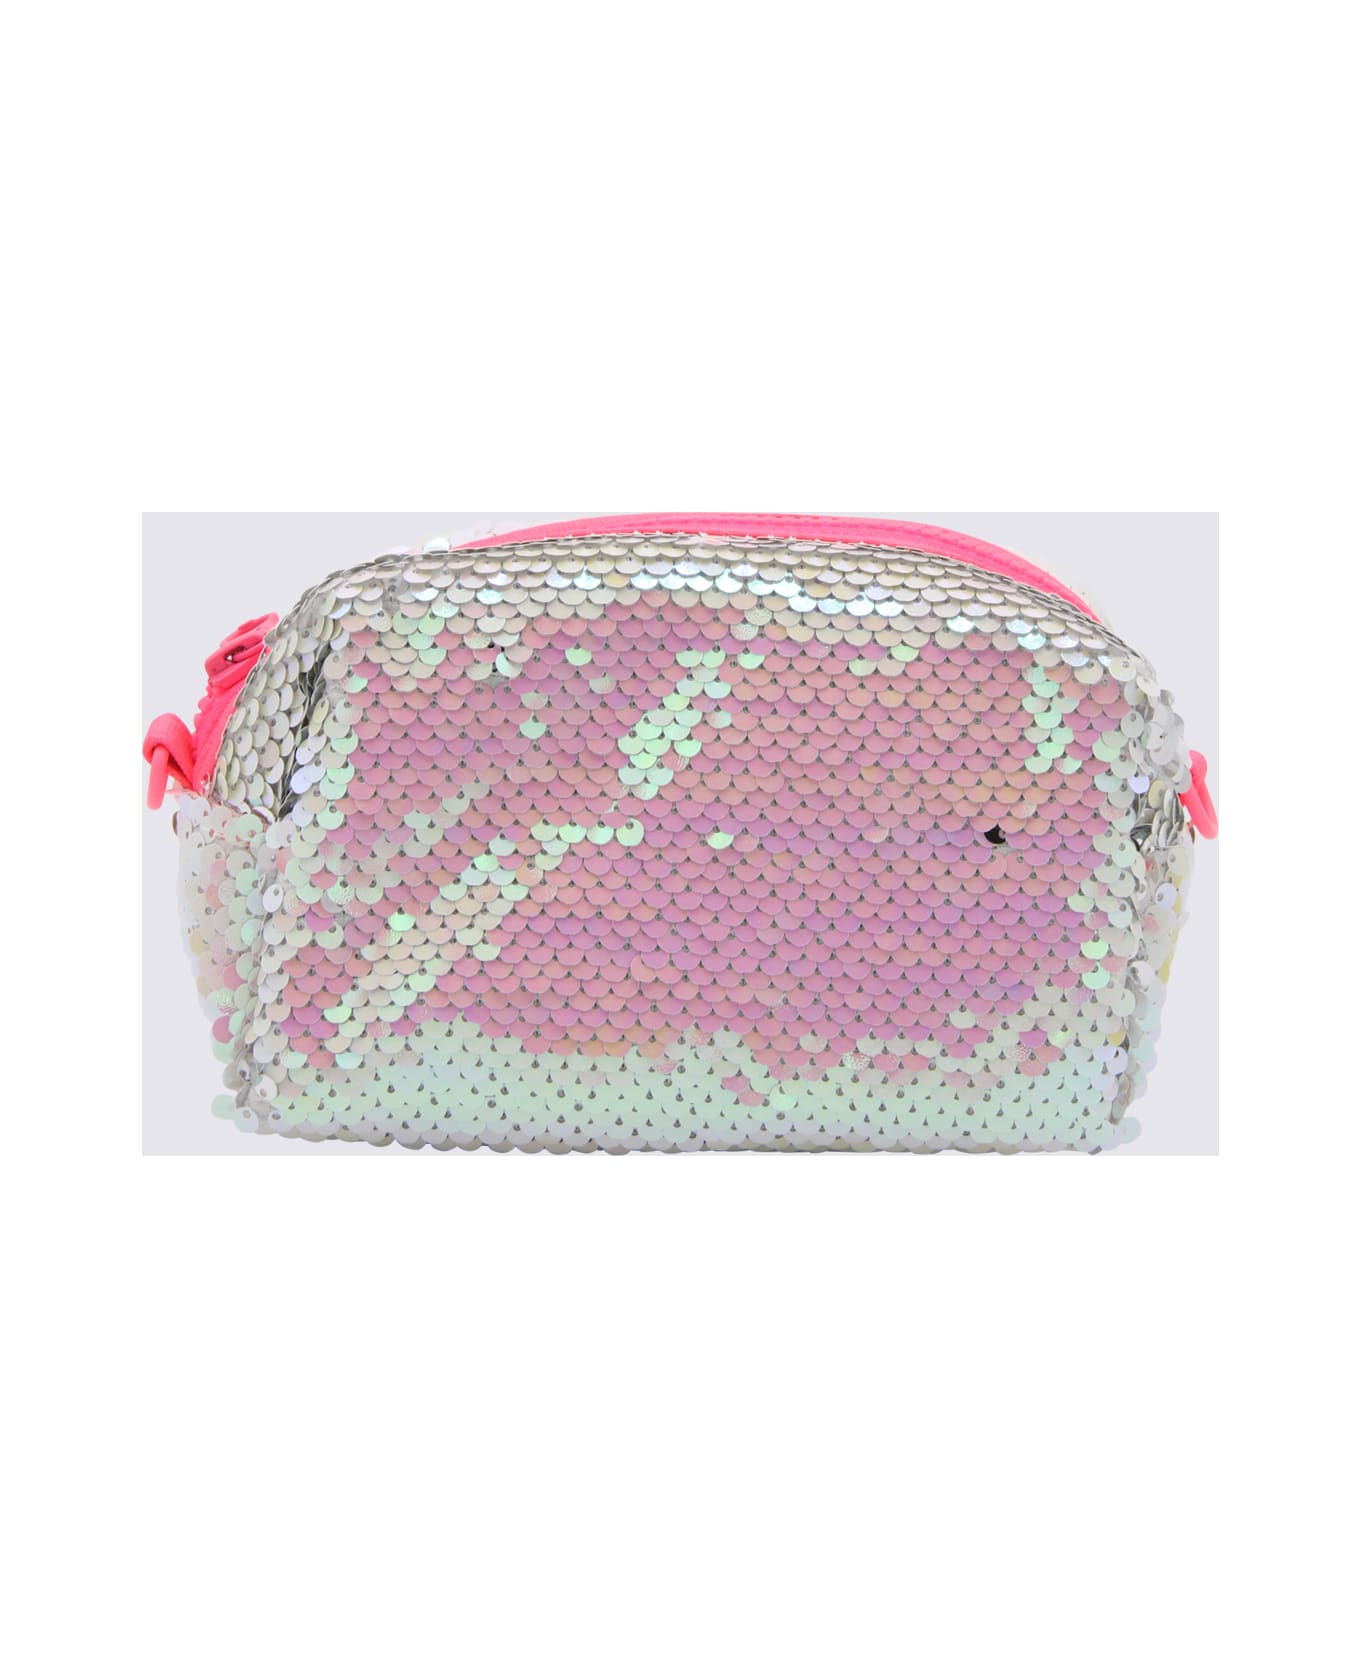 Billieblush Pink And Silver Pouches - White